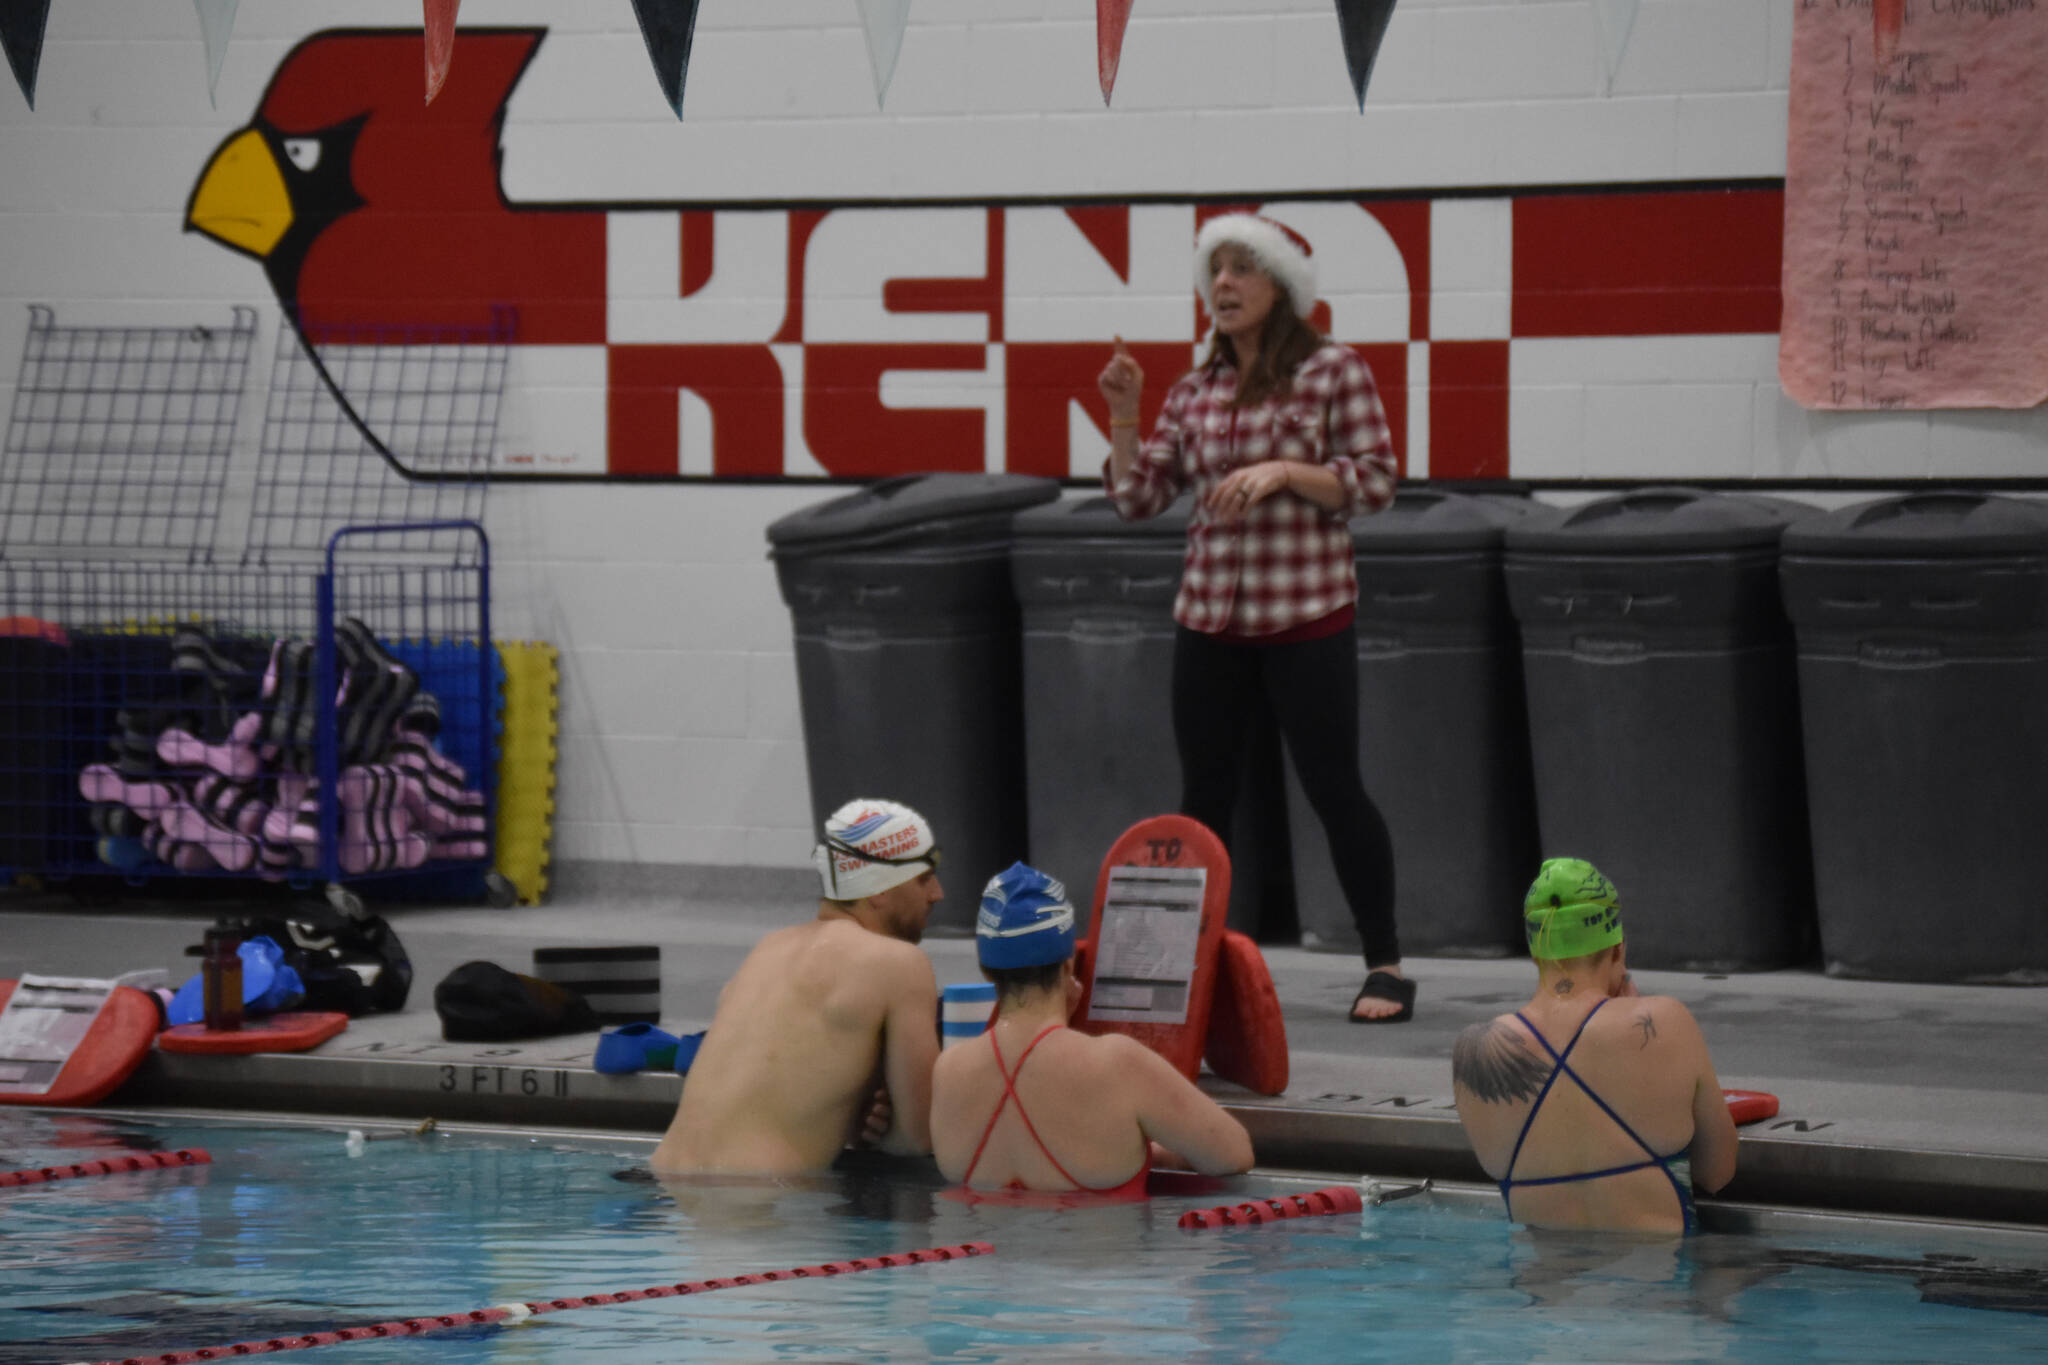 Angie Brennan directs swimmers as they prepare for a workout set during a Top of the World Swimming practice on Wednesday, Dec. 14, 2022 at Kenai Central High School in Kenai, Alaska. (Jake Dye/Peninsula Clarion)